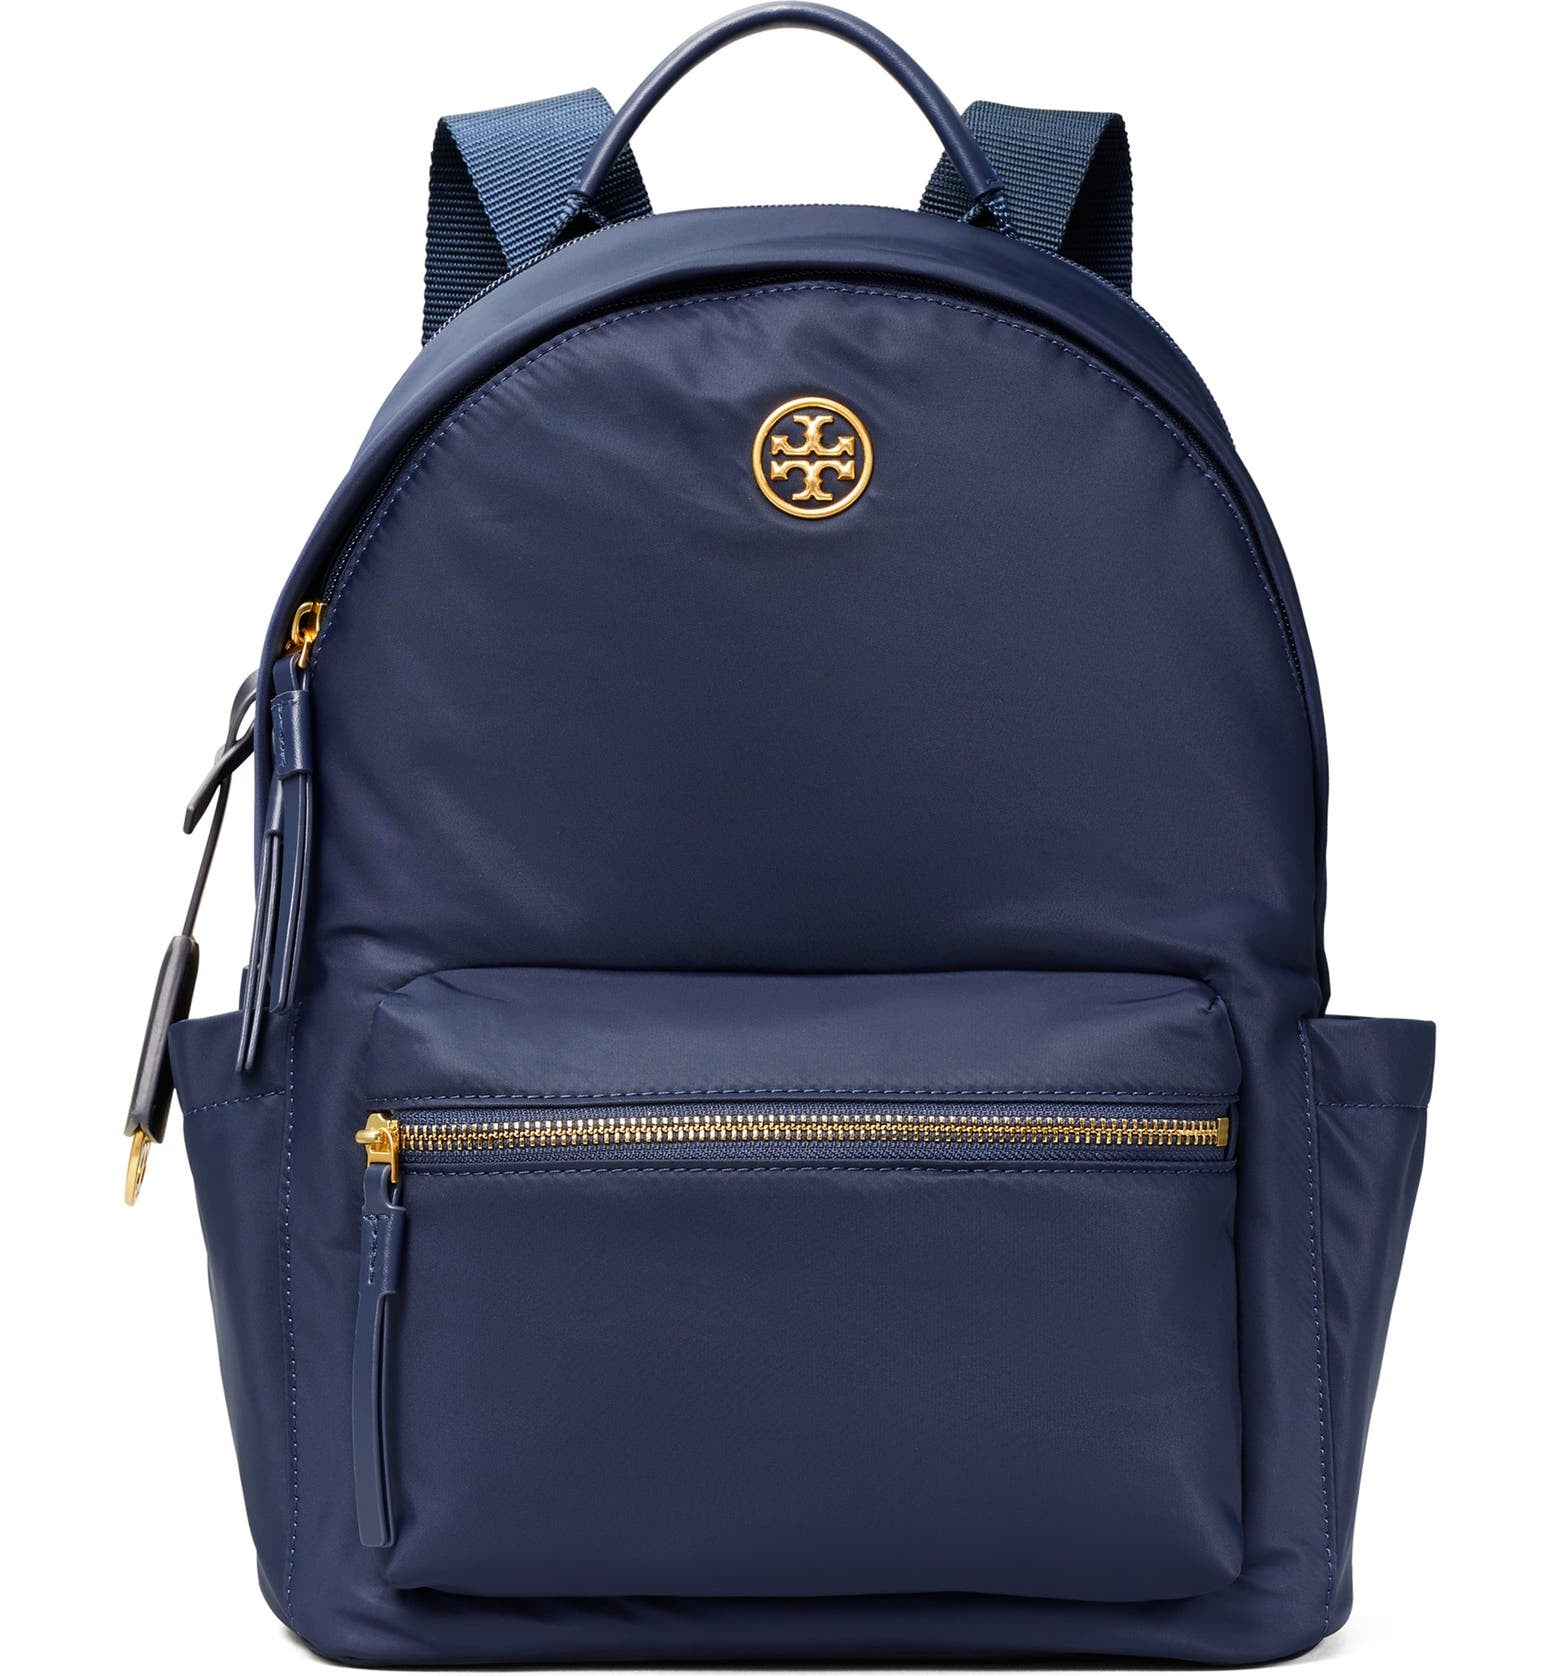 Tory Burch Piper Nylon Backpack | 16 Stylish Backpacks If You Like to Be  Hands-Free at All Times | POPSUGAR Travel Photo 16